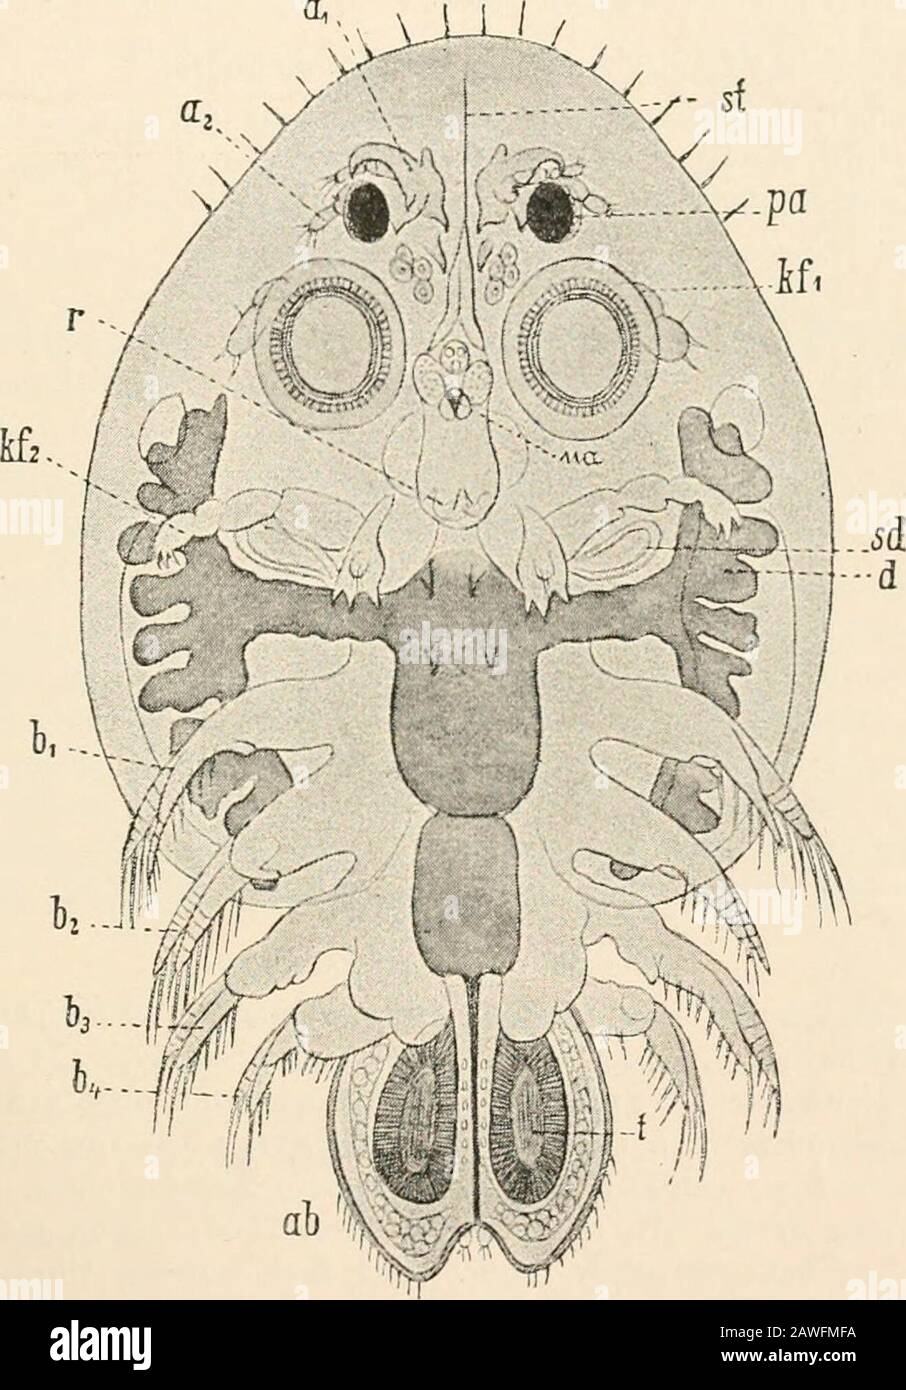 Text-book of comparative anatomy . CRUSTACEA—SYtiTEMATIG EEVIEW 291 sac-shaped. The females carry about the fertilised eggs in a paired or unpairedovisac. Gills are wanting. Free-living or commensal Copepoda: Cyclops, Cantho-tus, in freshwater; Cetochilus, Clausocalaiius (Fig. 194), marine; Notodelphys,commensal in the branchial cavity of the Ascidians. Parasitic Copepoda : Corycceus,Xlj/i/iiriiia (some of which are only occasionally or temporarily parasitic), Chondra-canthus, Caligus, Lerncea, Lcrnceocera, Pcnella, Lcrnanthropus, Lernceascus, Achtheres,A nchorella. Sub-Order 2. Branchiura (Ar Stock Photo